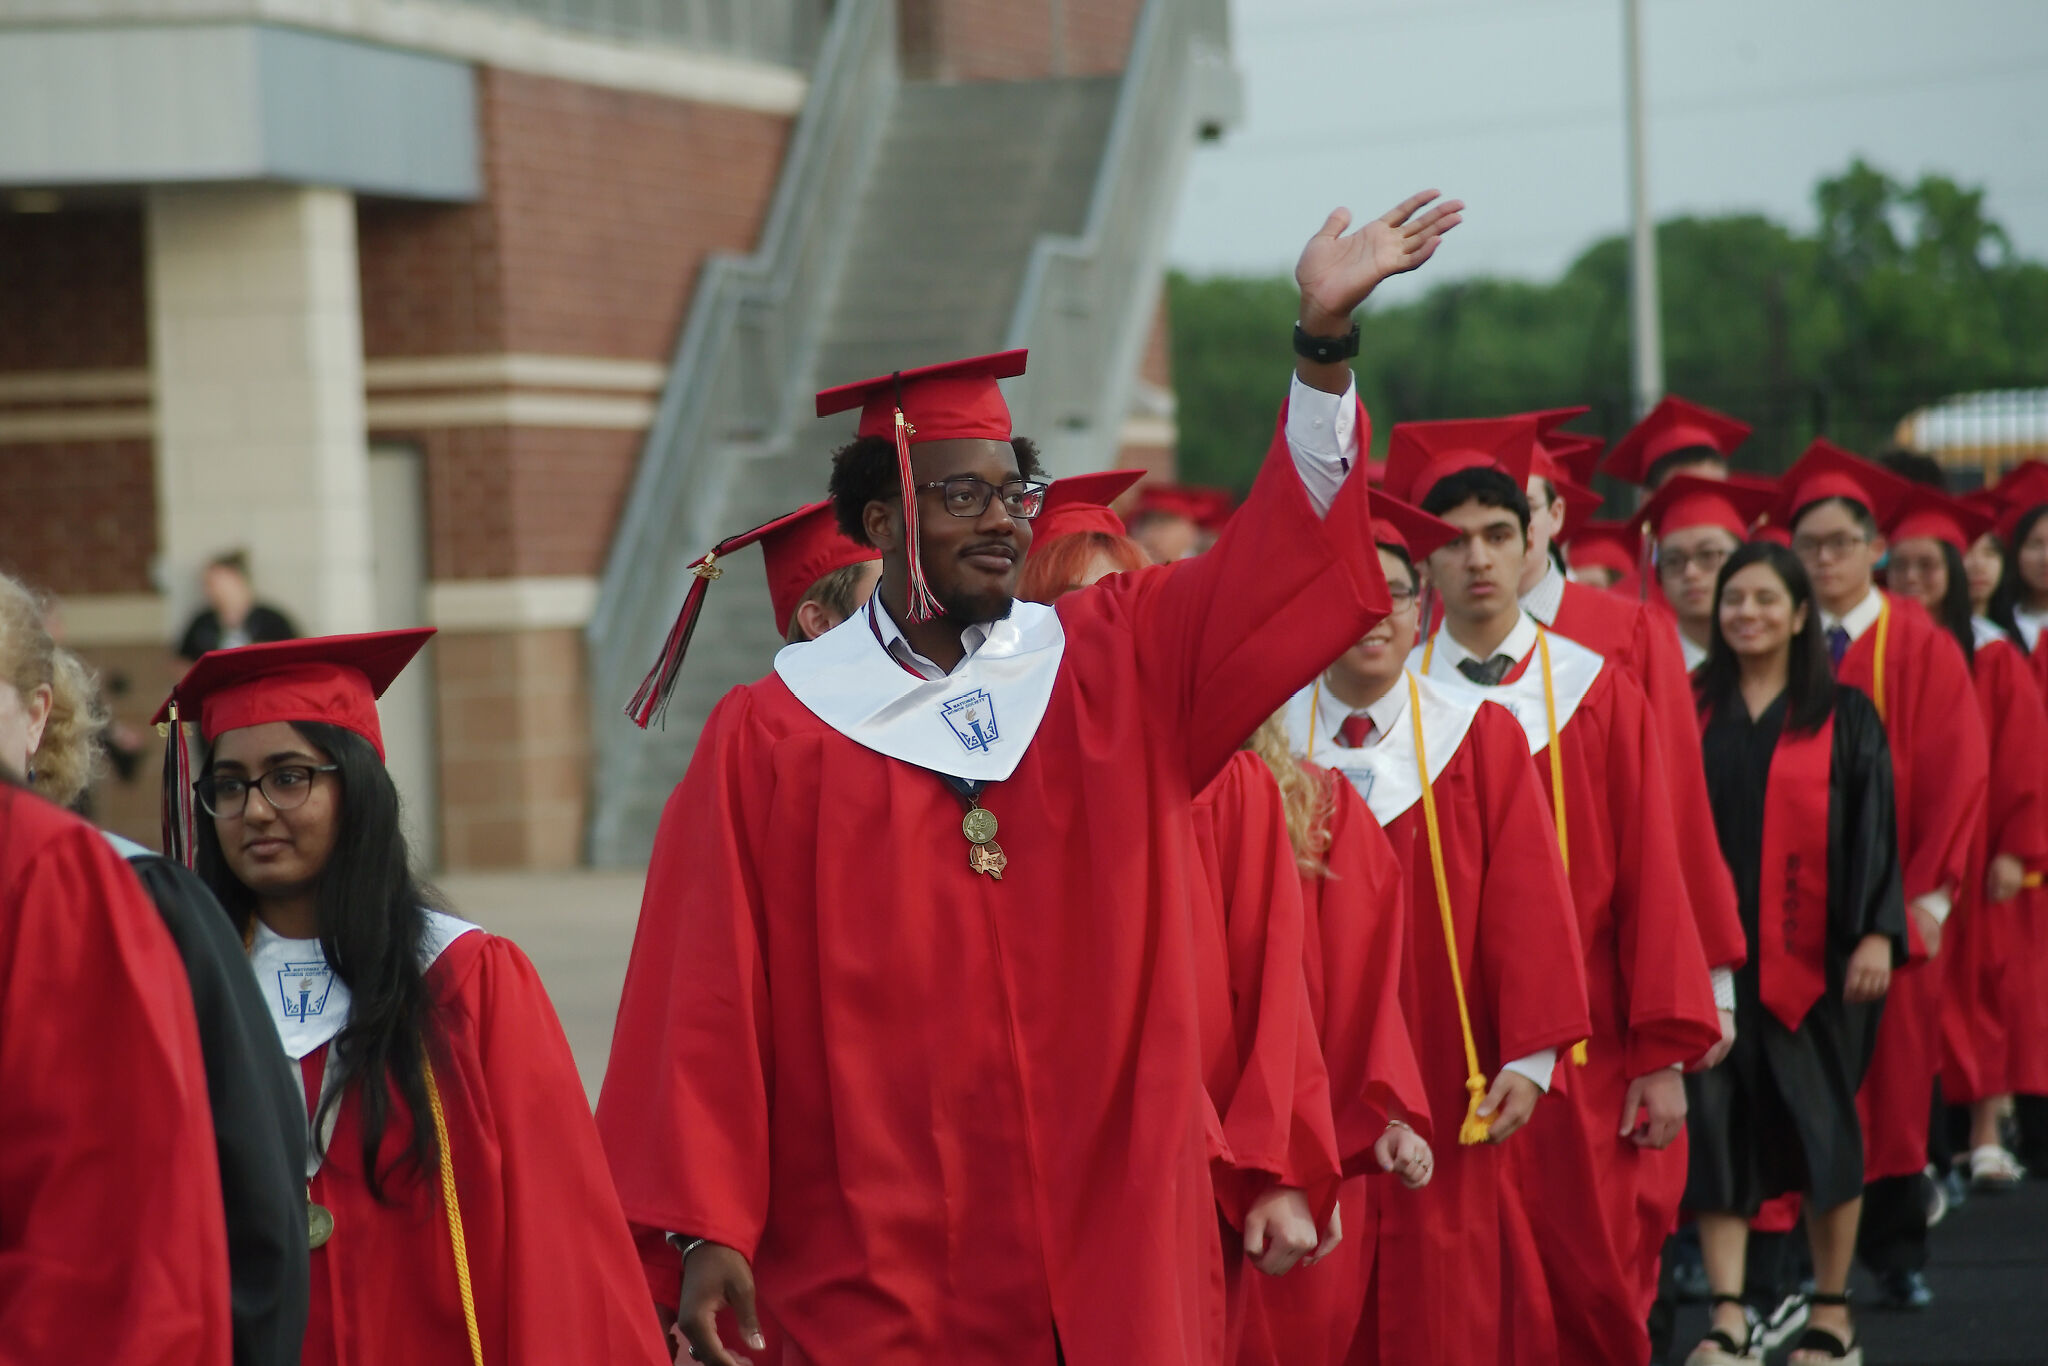 See scenes from Clear Brook High’s graduation ceremony